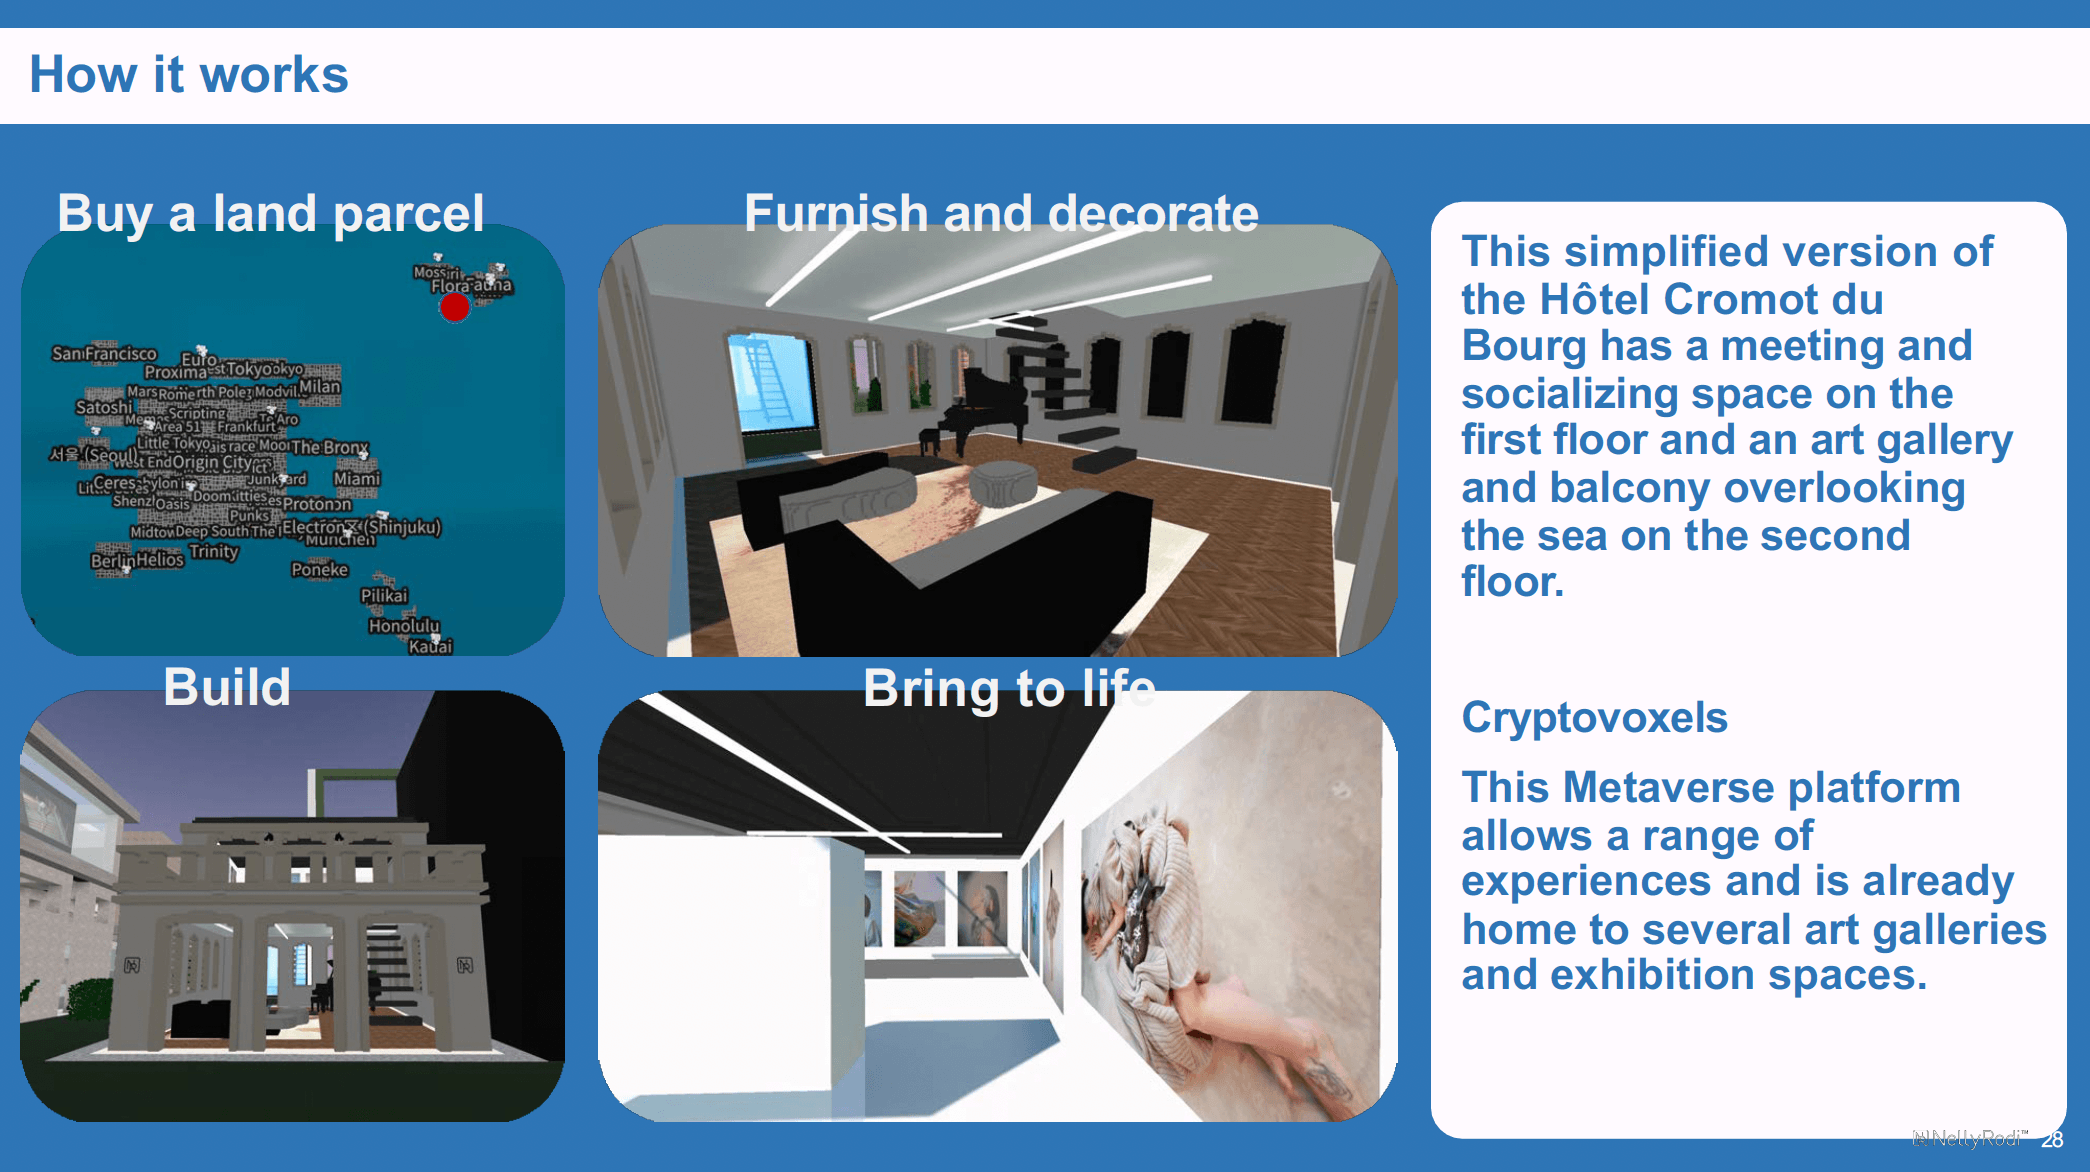 Cryptovoxels This simplified version of the H tel Cromot du Bourg has a meeting and socializing space on the first floor and an art gallery